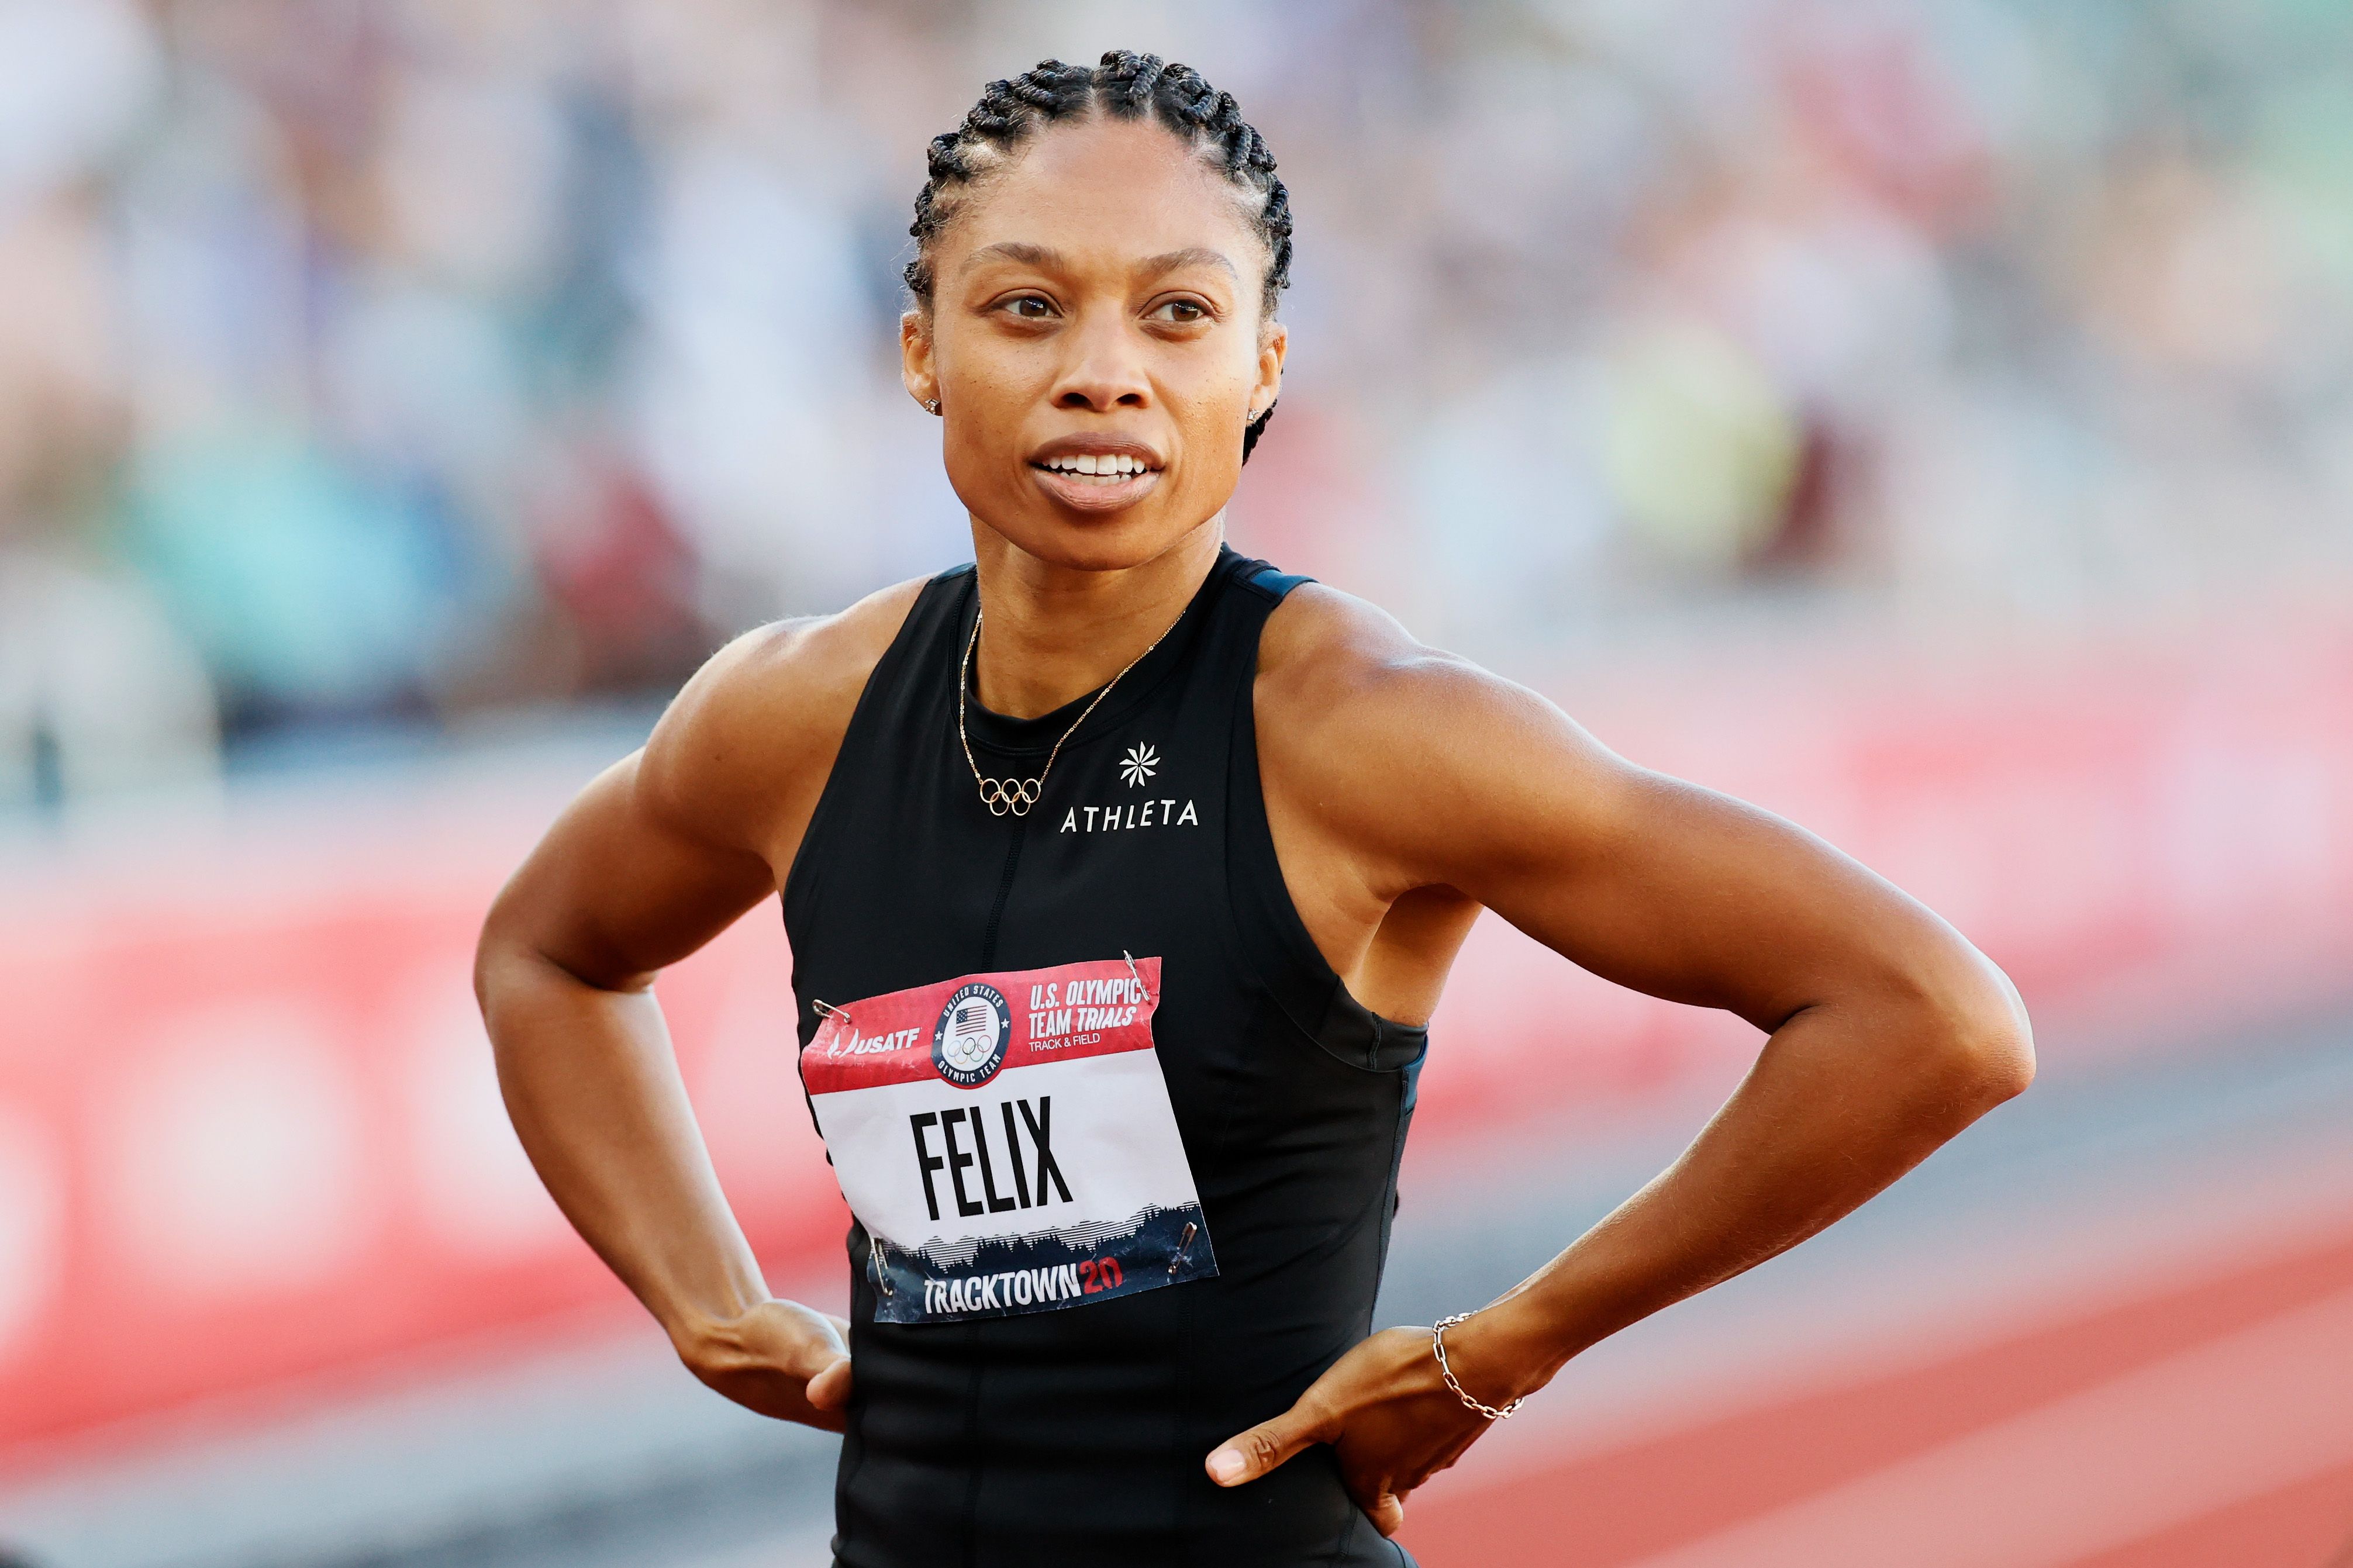 25 Most Famous Black Athletes in 2022